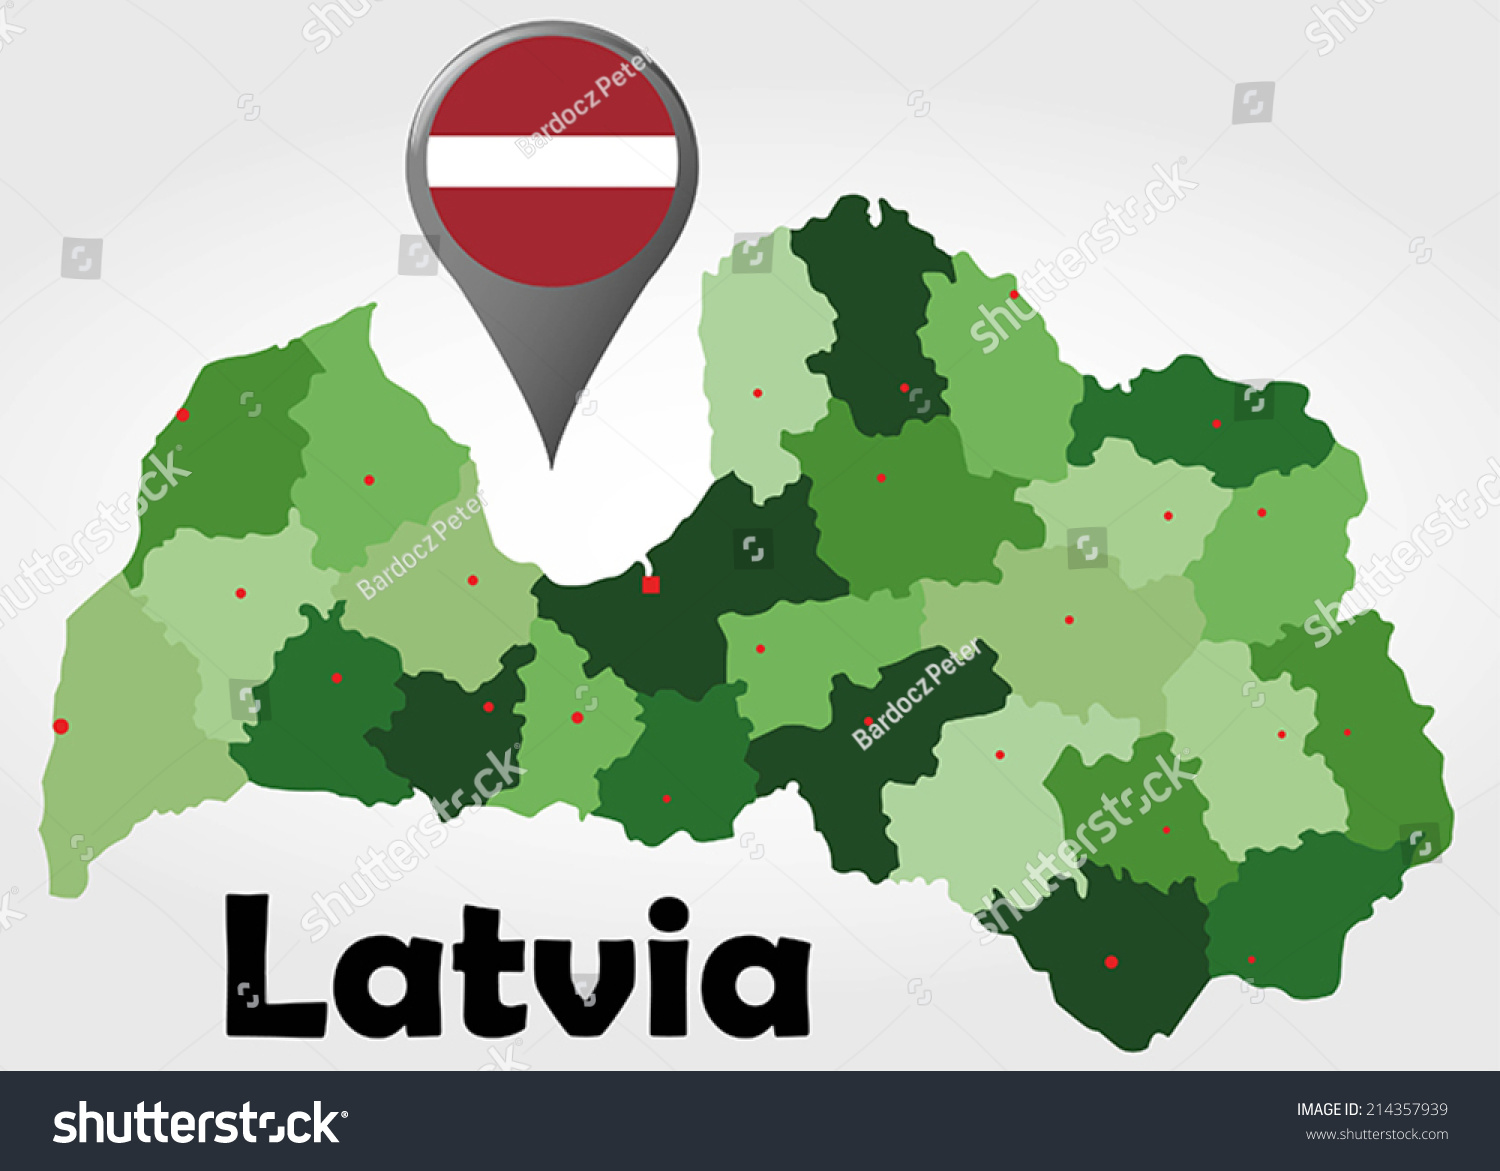 Latvia political map with green shades and map pointer. #214357939